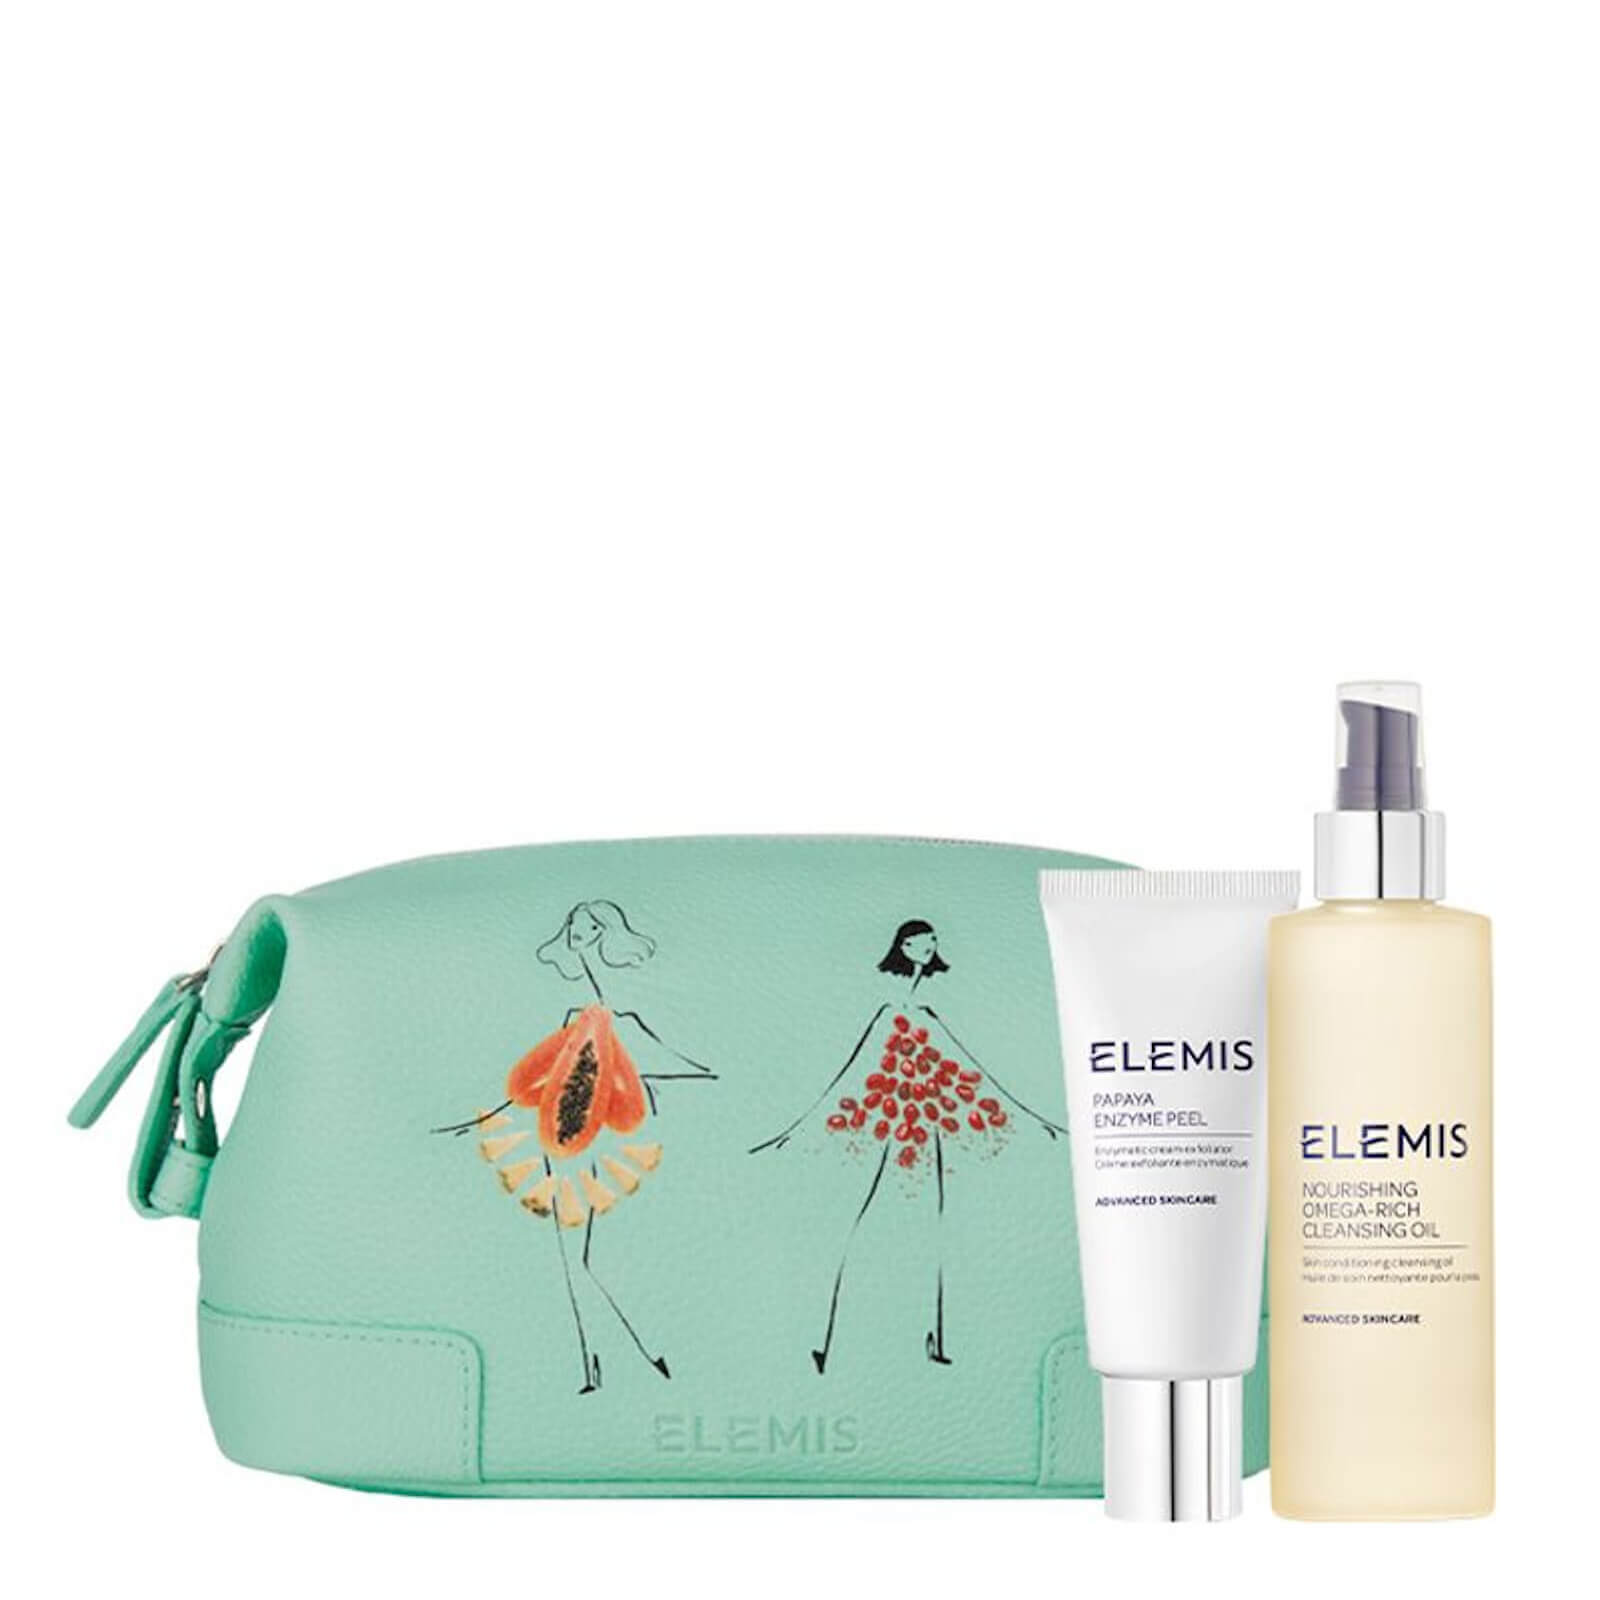 Elemis x Gretchen Roehers The Glow-Getters Limited Edition Duo Collection